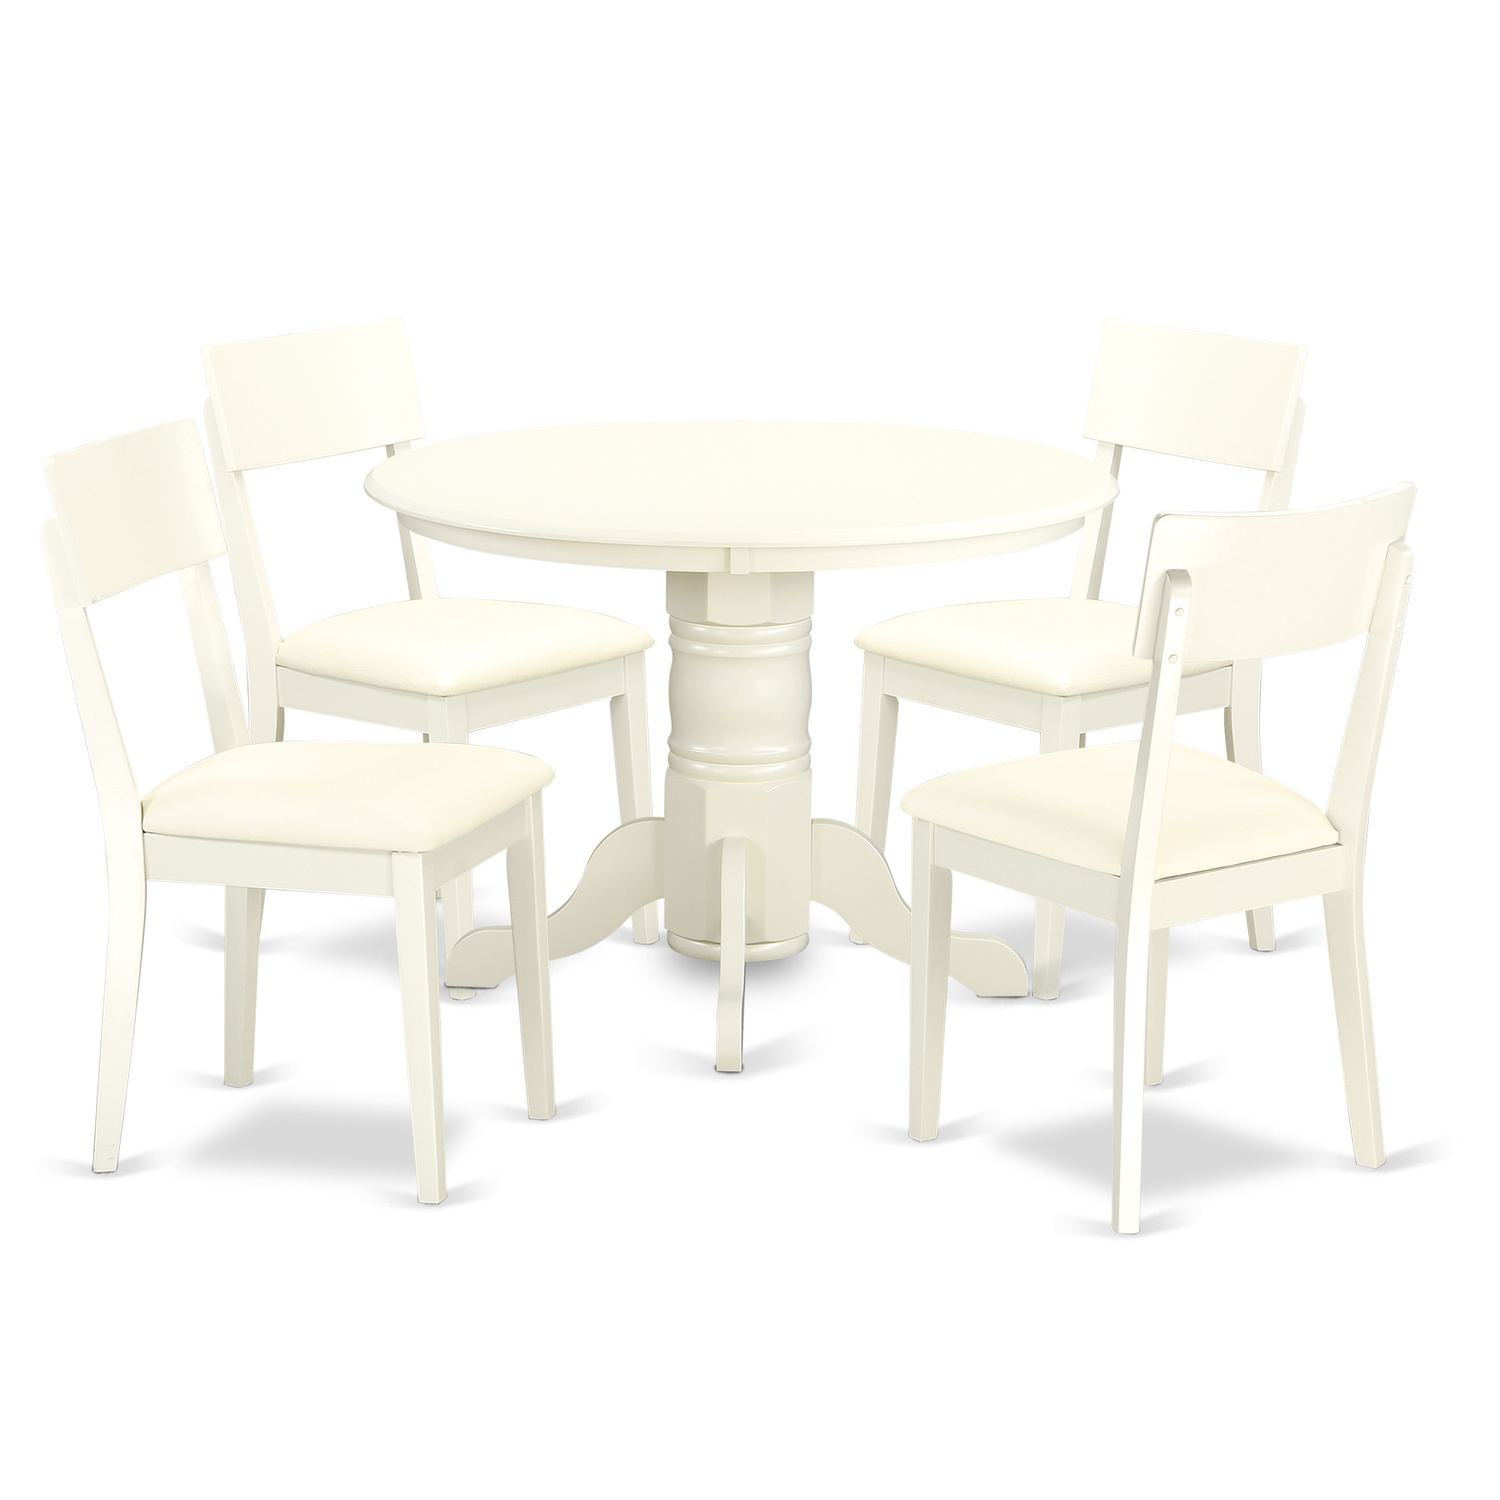 East West Furniture Shelton 5-Piece Linen and Wooden Dining Set in White - image 1 of 7